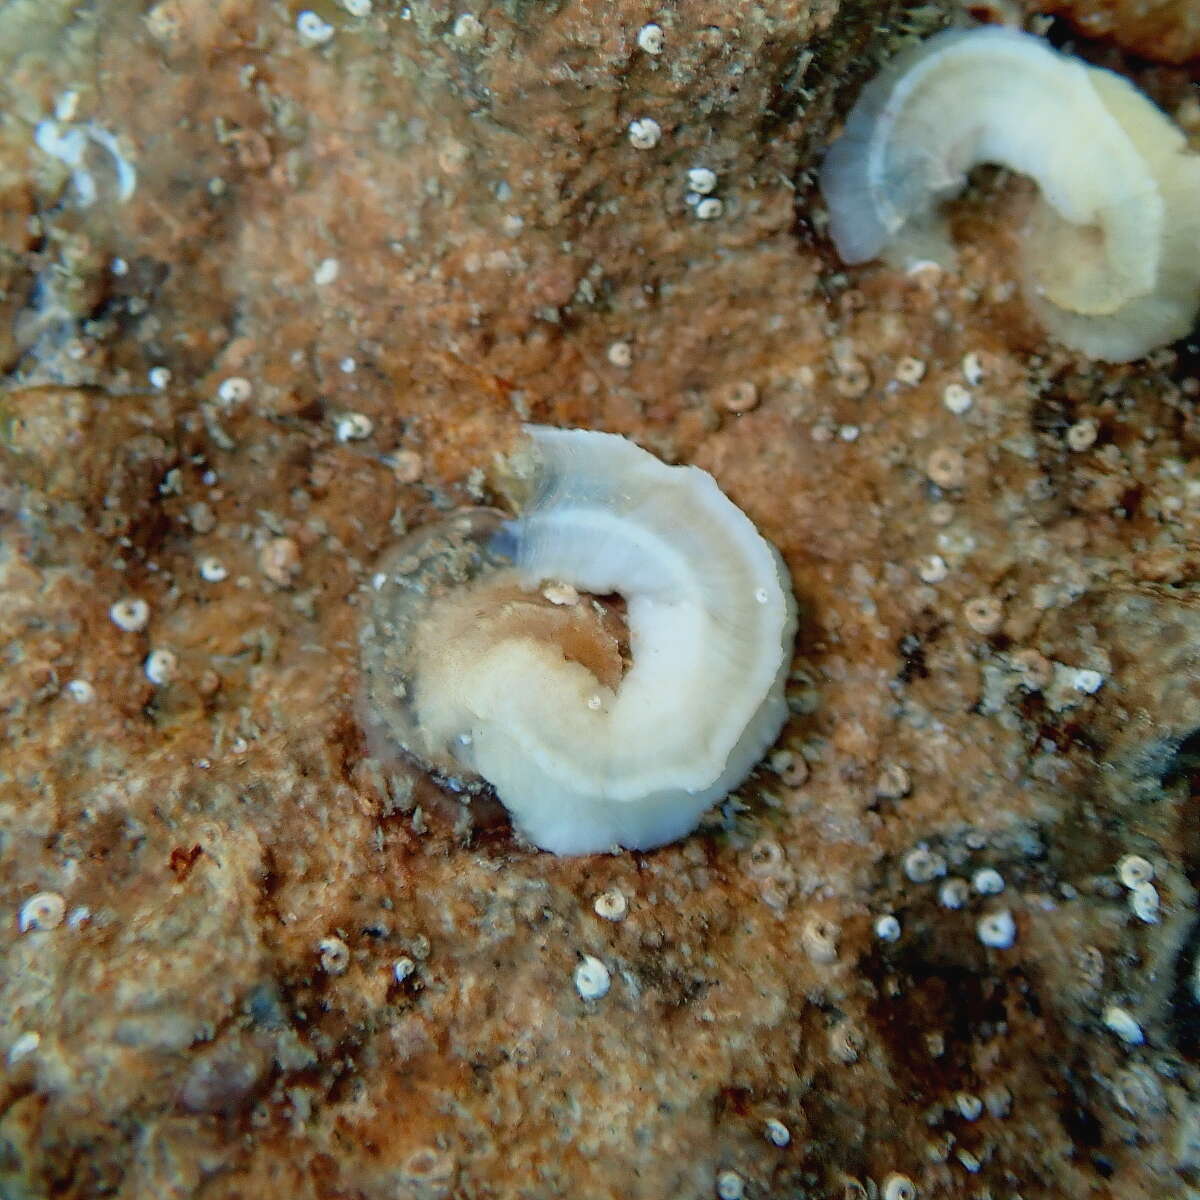 Image of worm shell